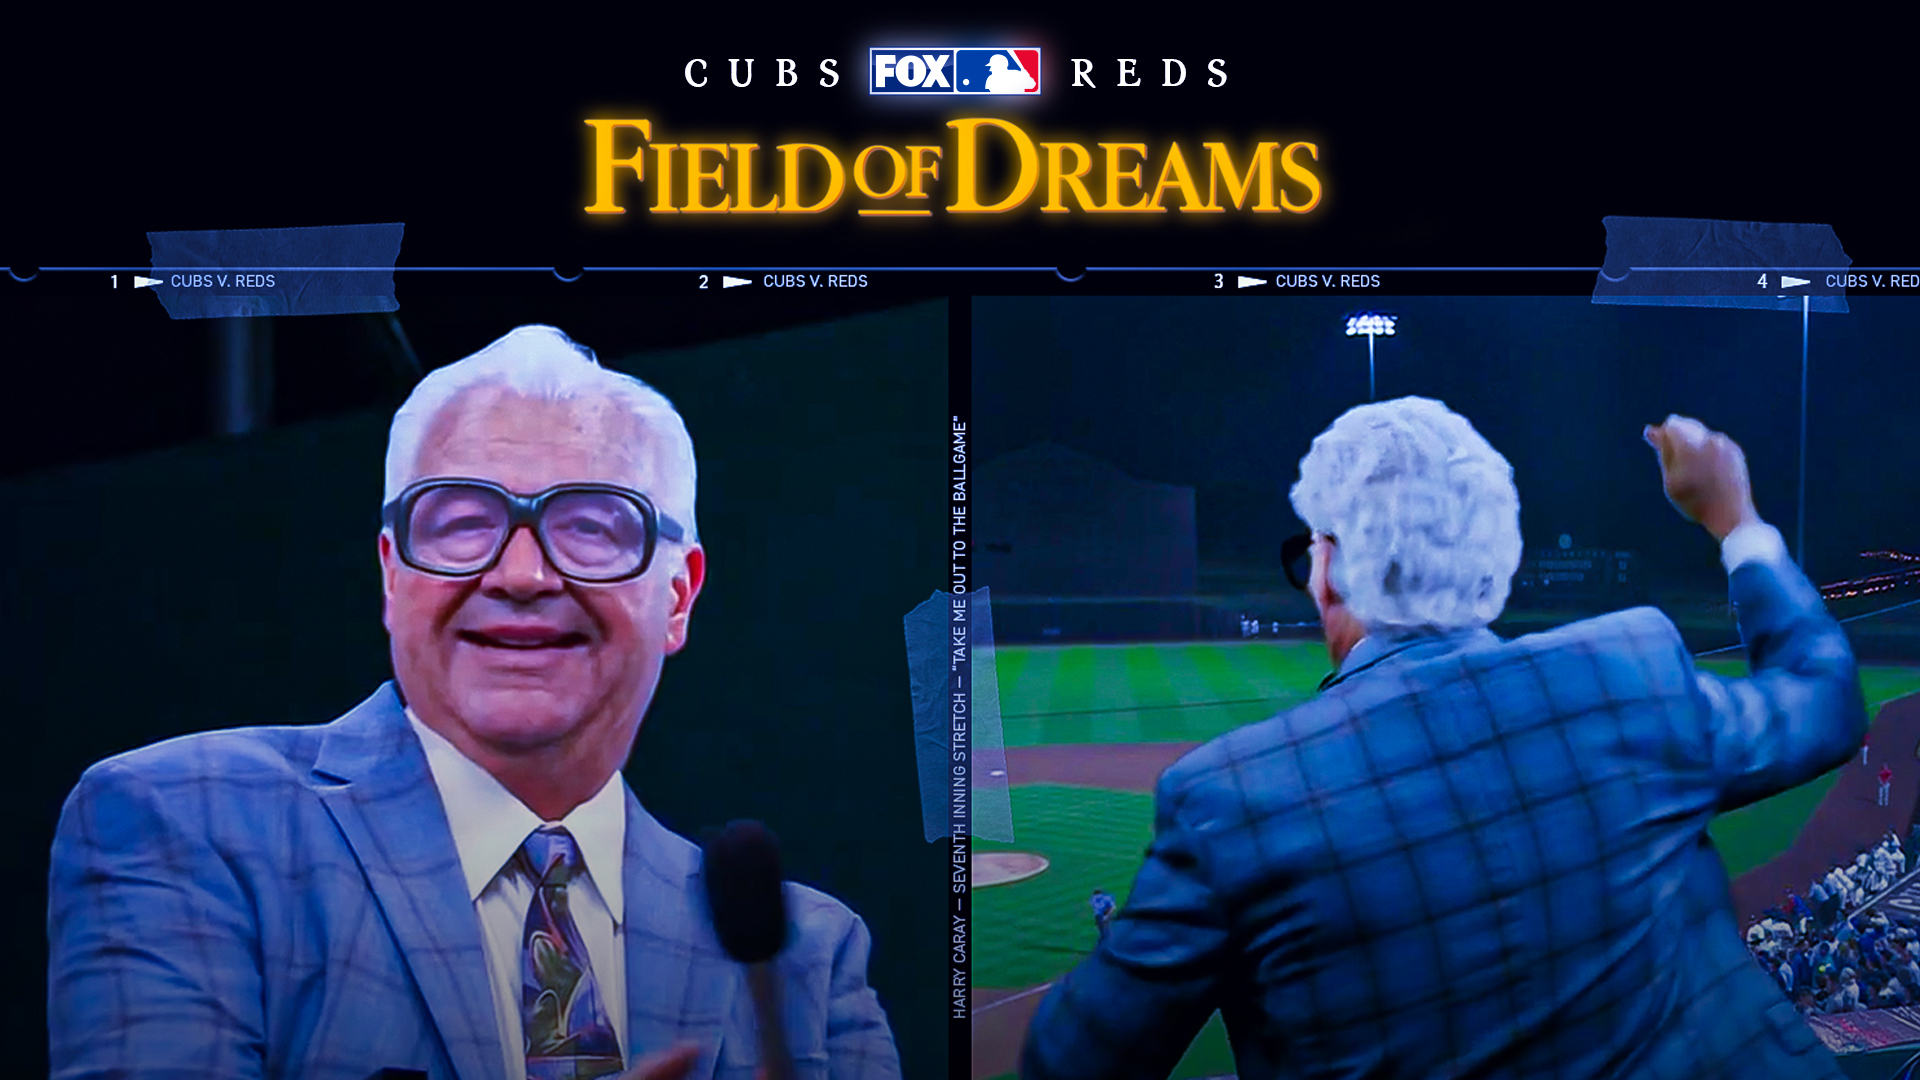 MLB Field of Dreams Game: Cubs vs Reds - Renegade Sports Analytics